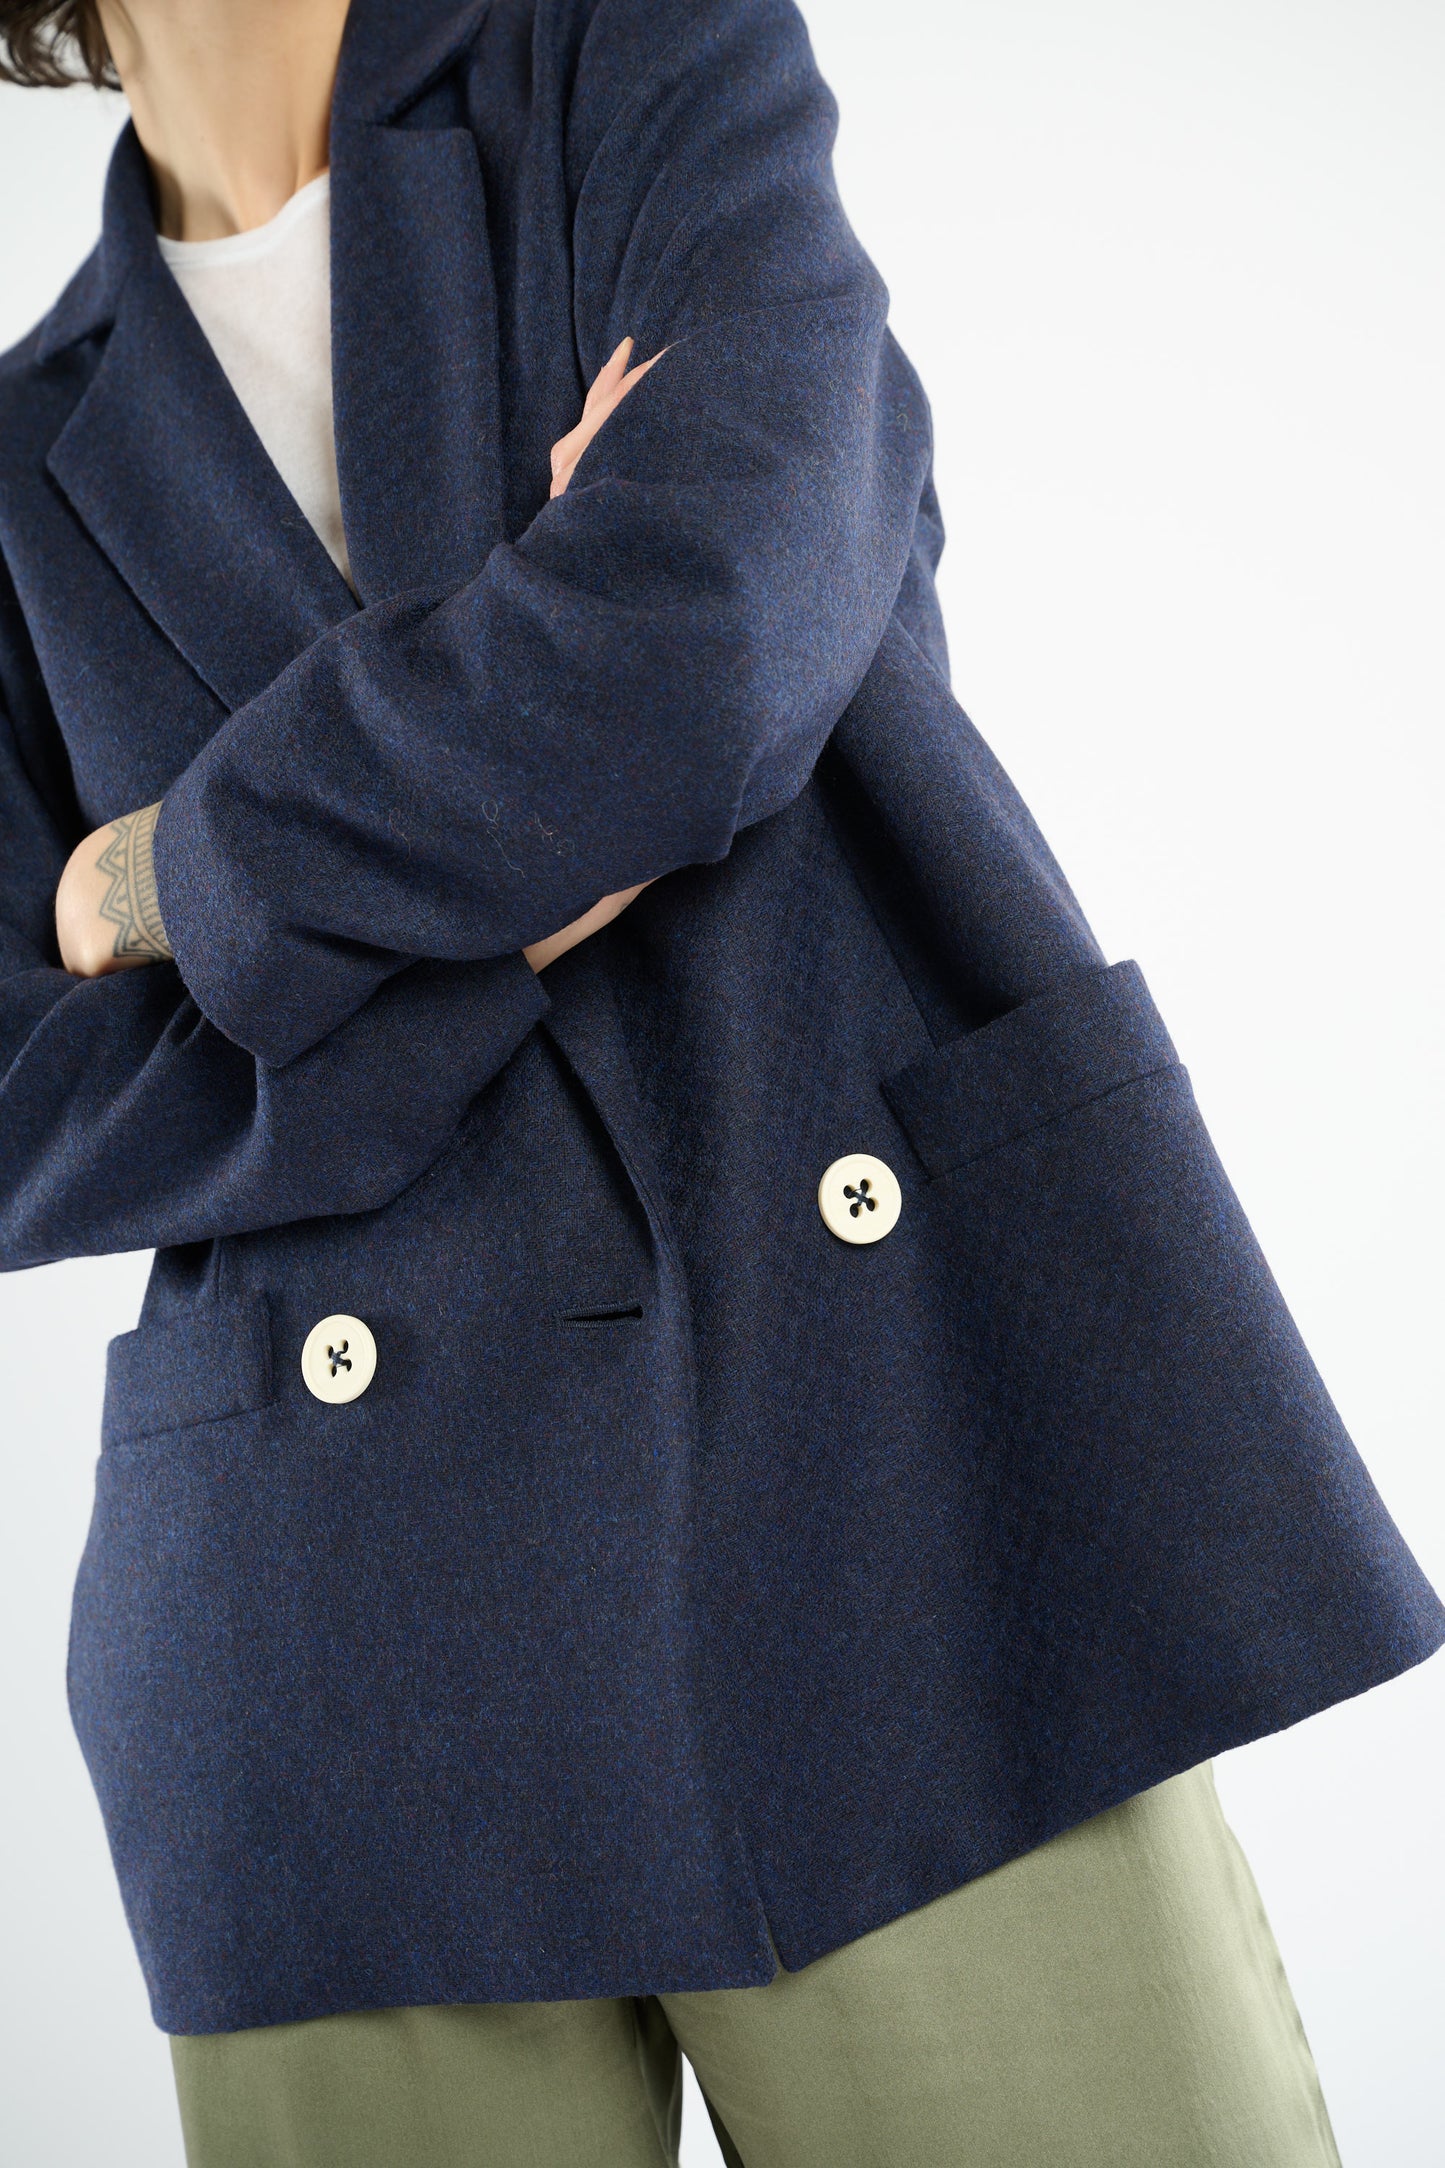 CASHMERE AND WOOL JACKET NAVY